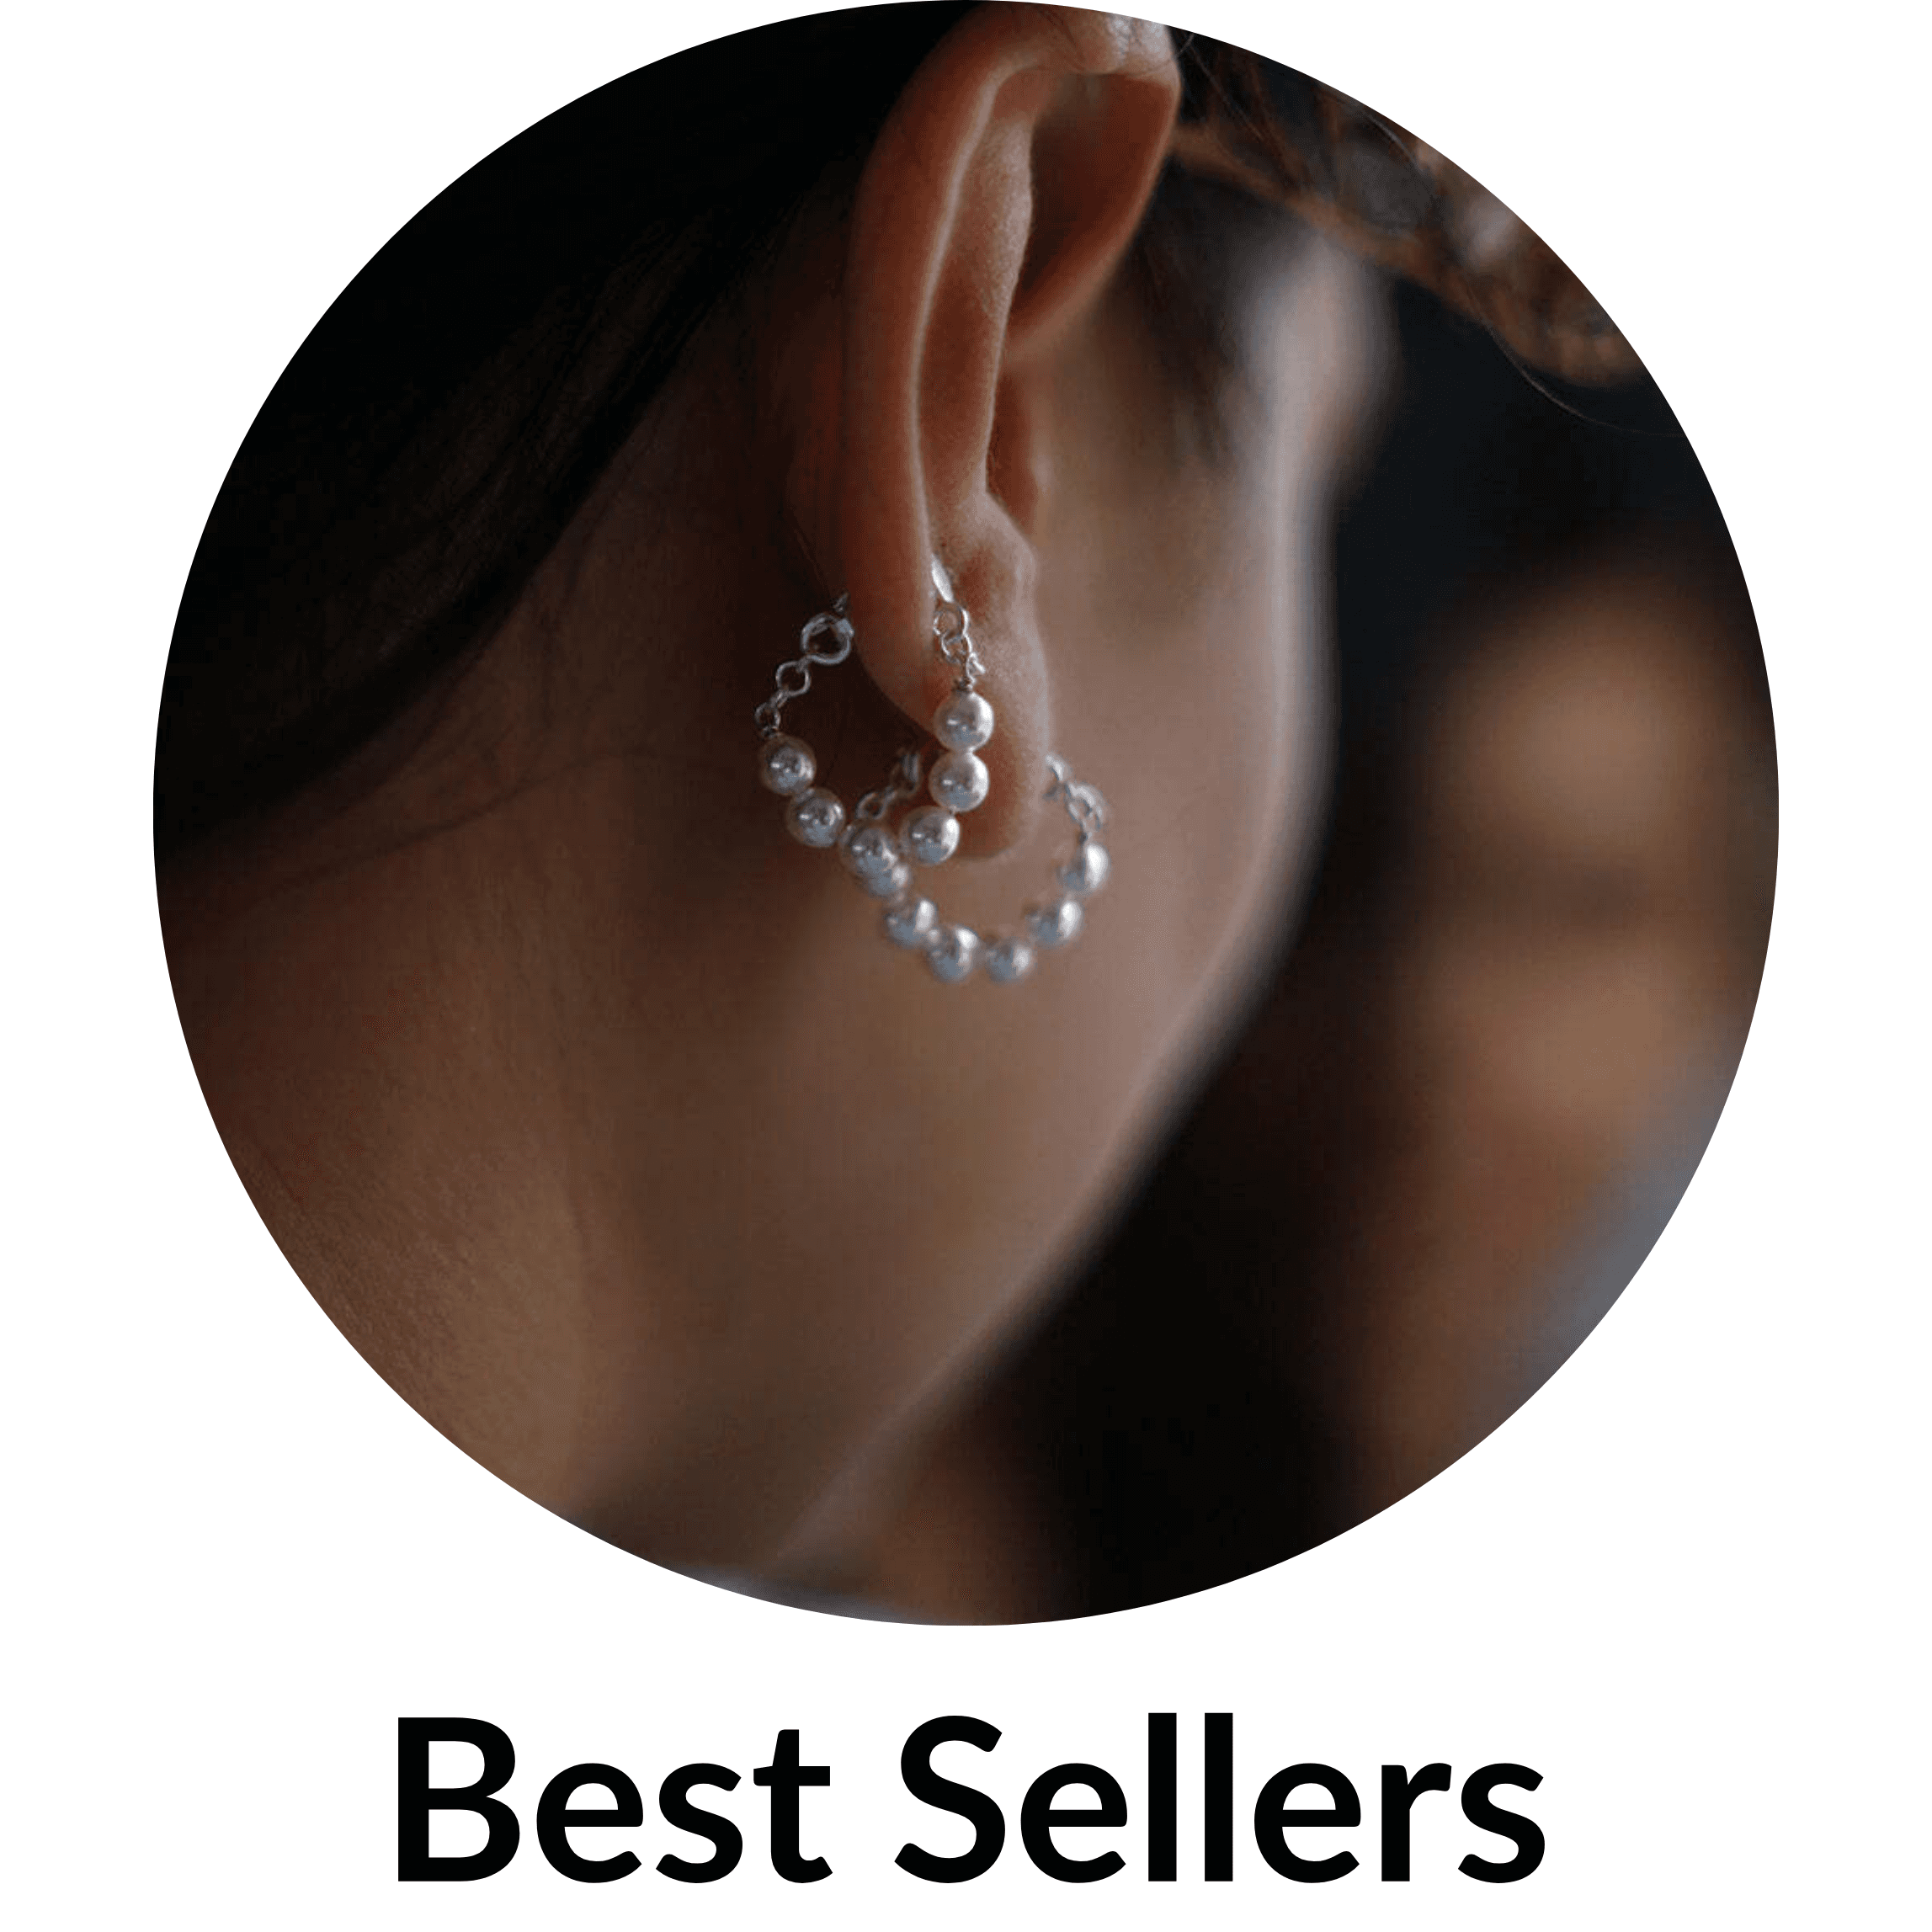 Picking Out Best Nose Rings - Wife's Choice | Cute nose piercings, Nose  piercing stud, Nose stud sizes